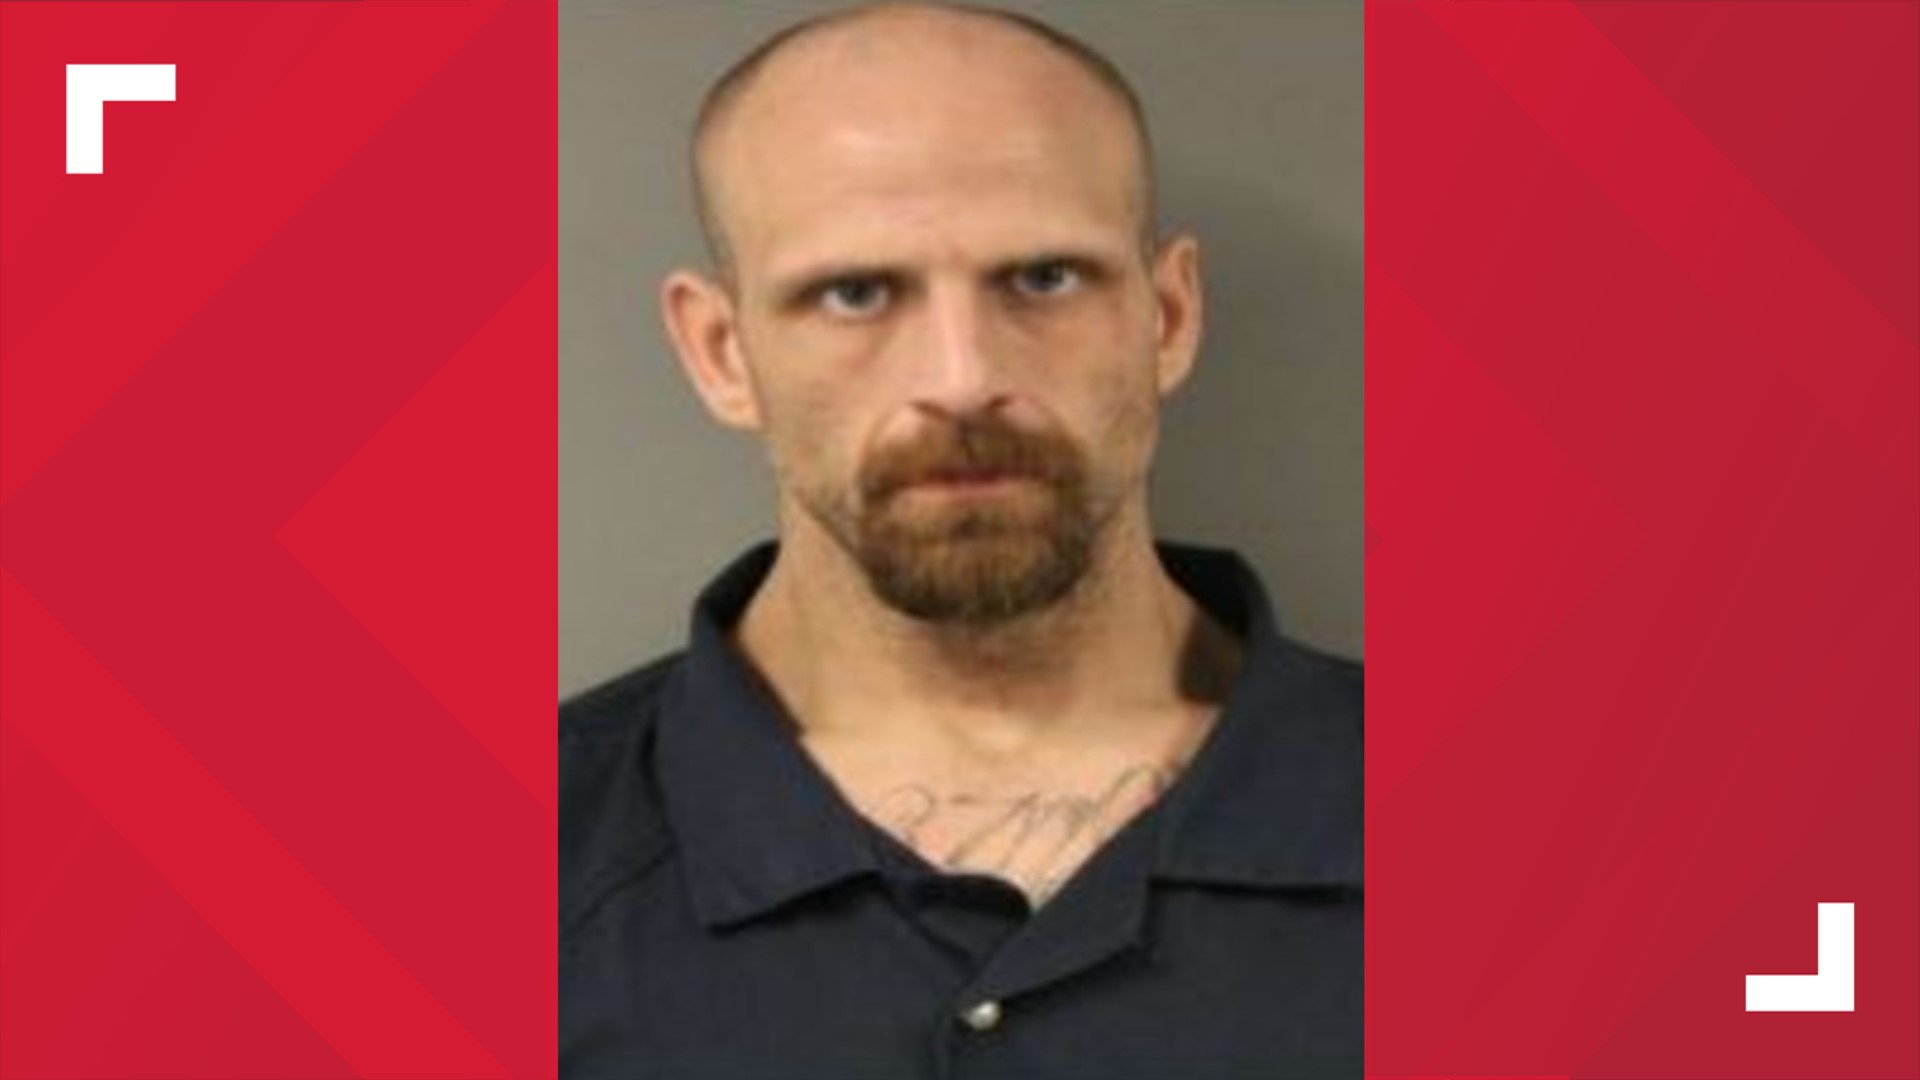 37-year-old David Dayton of Fort Dodge is wanted for questioning in connection to the death of Ryan Andrews.